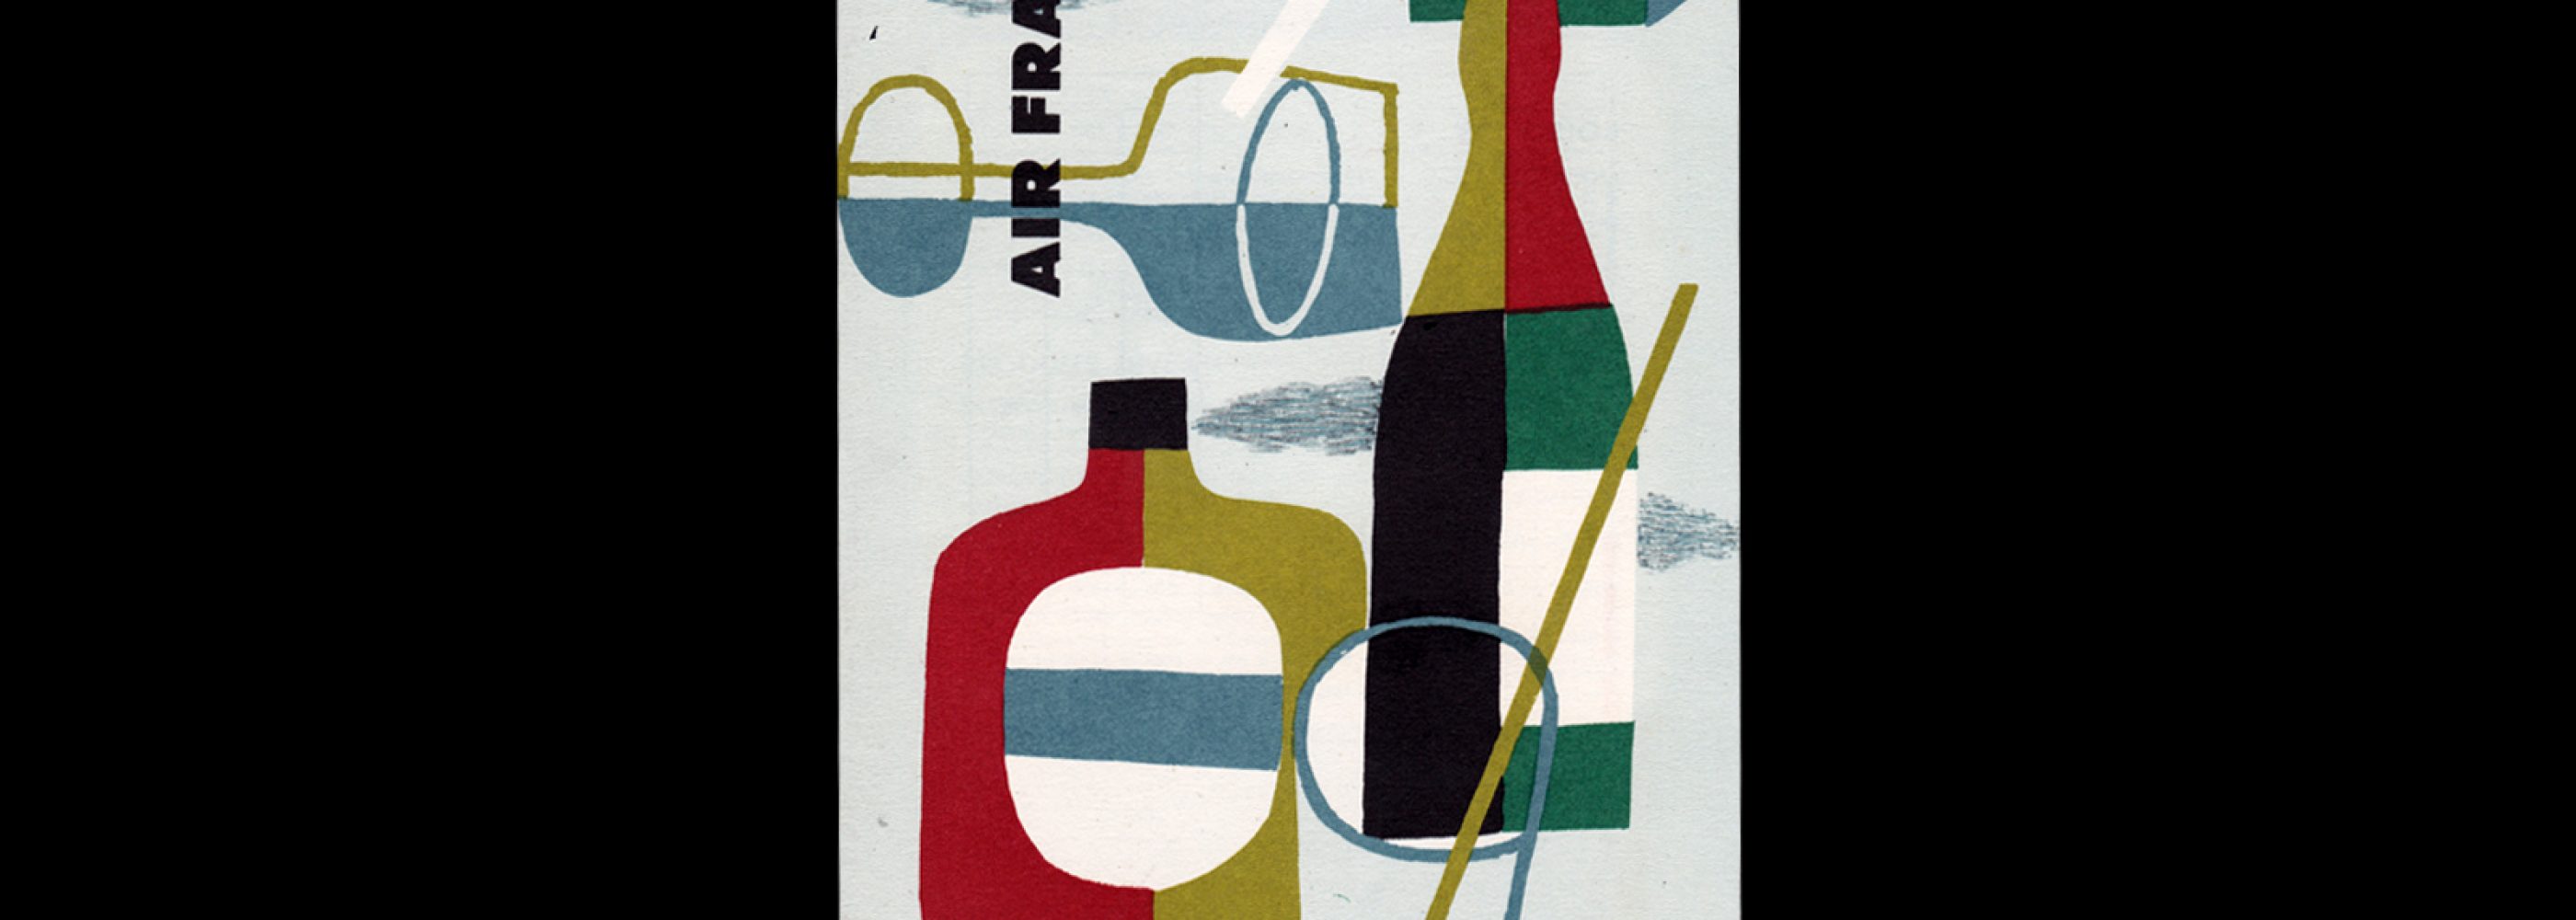 Air France – Alcohol Price List Format: Folded Brochure Designer/s: Guy Georget Year: 1959